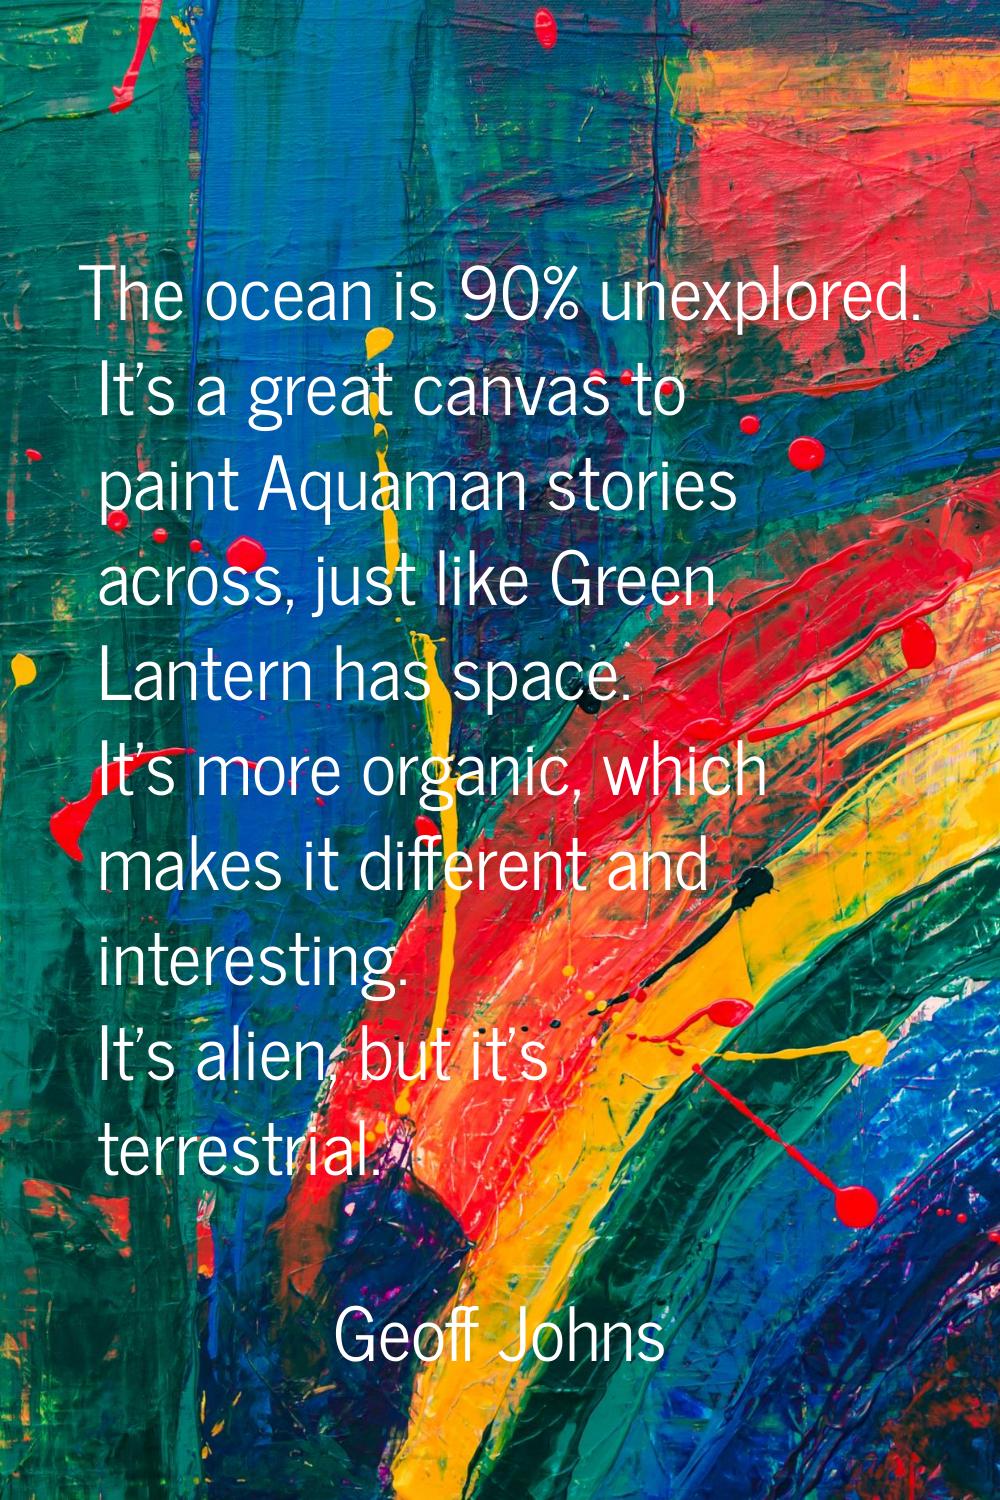 The ocean is 90% unexplored. It's a great canvas to paint Aquaman stories across, just like Green L